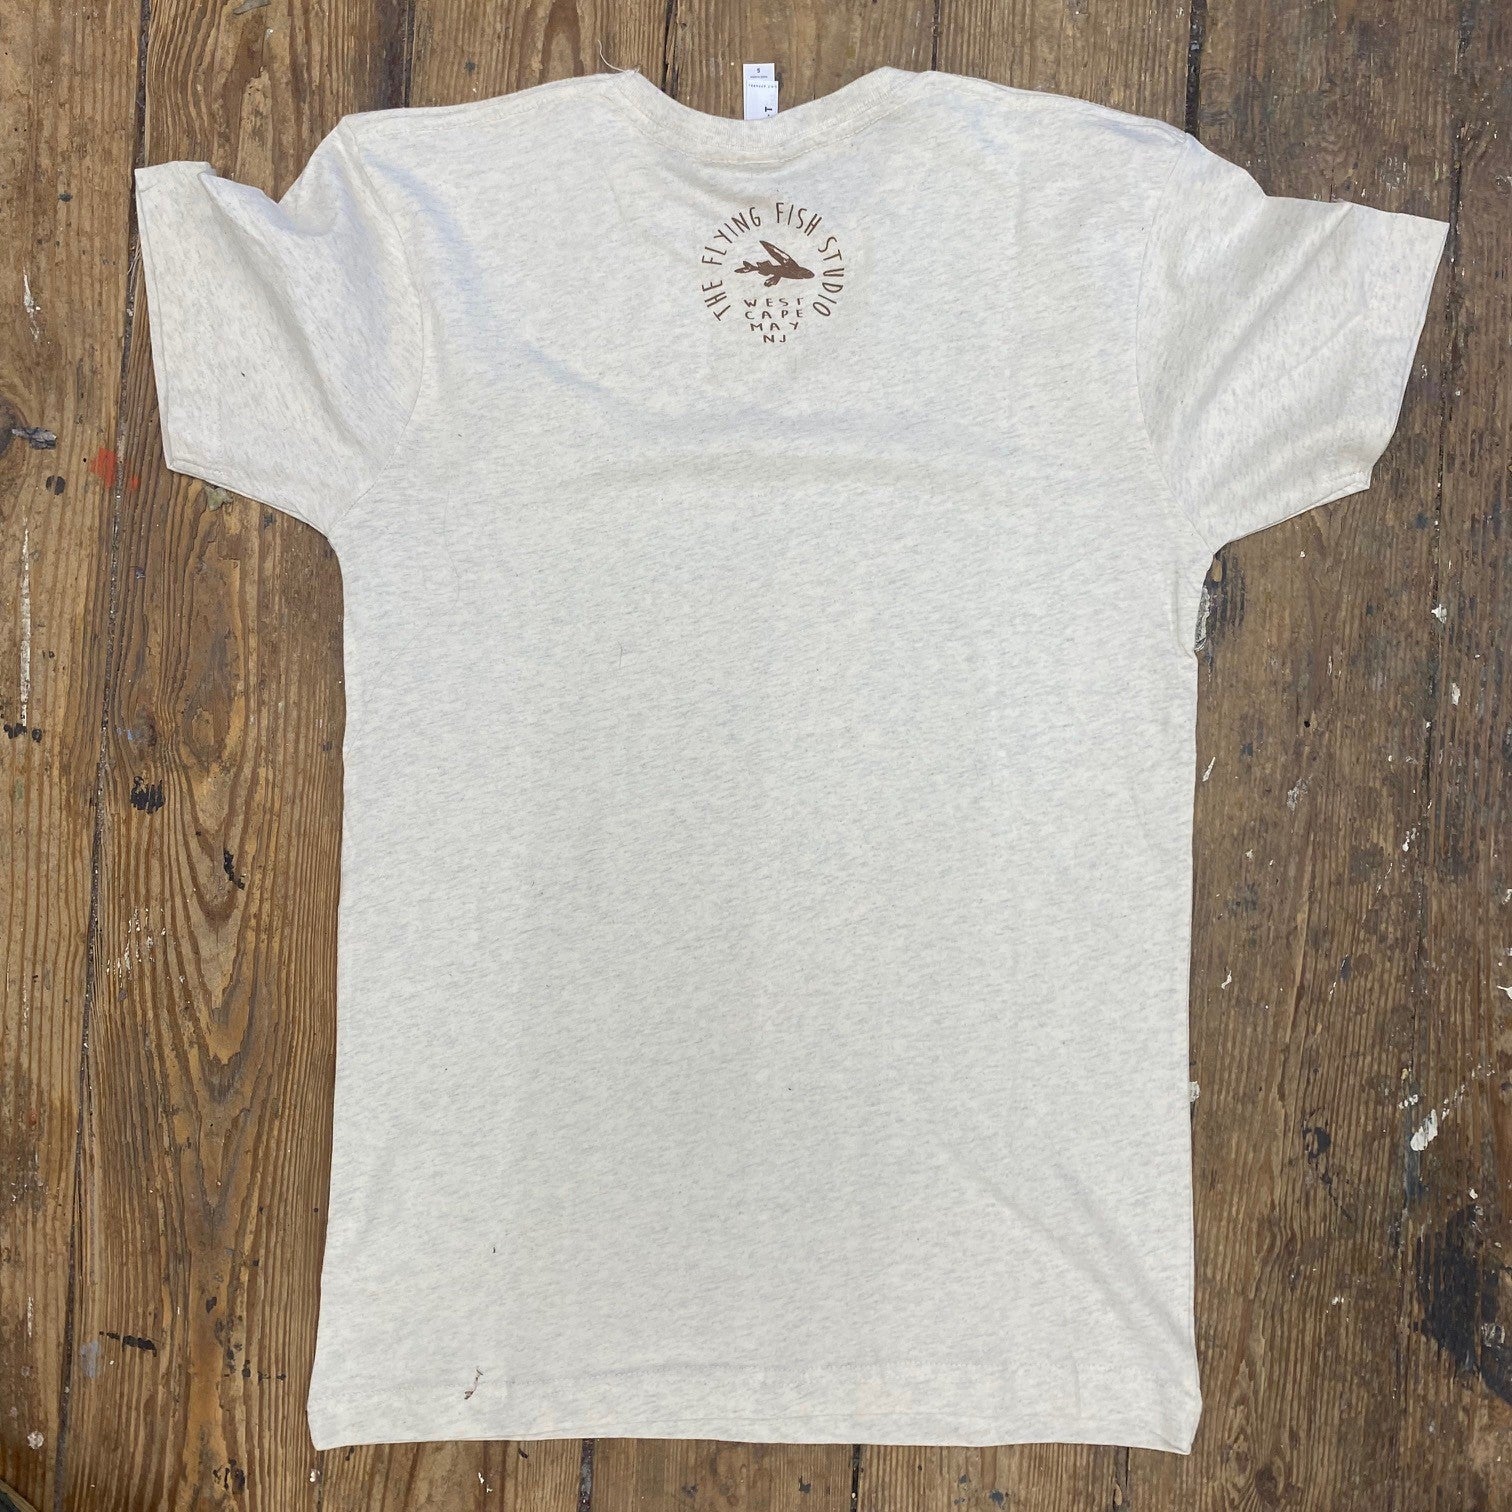 A heather, greyish-cream t-shirt with the 'Flying Fish Studio' design on the back neck in brown ink.